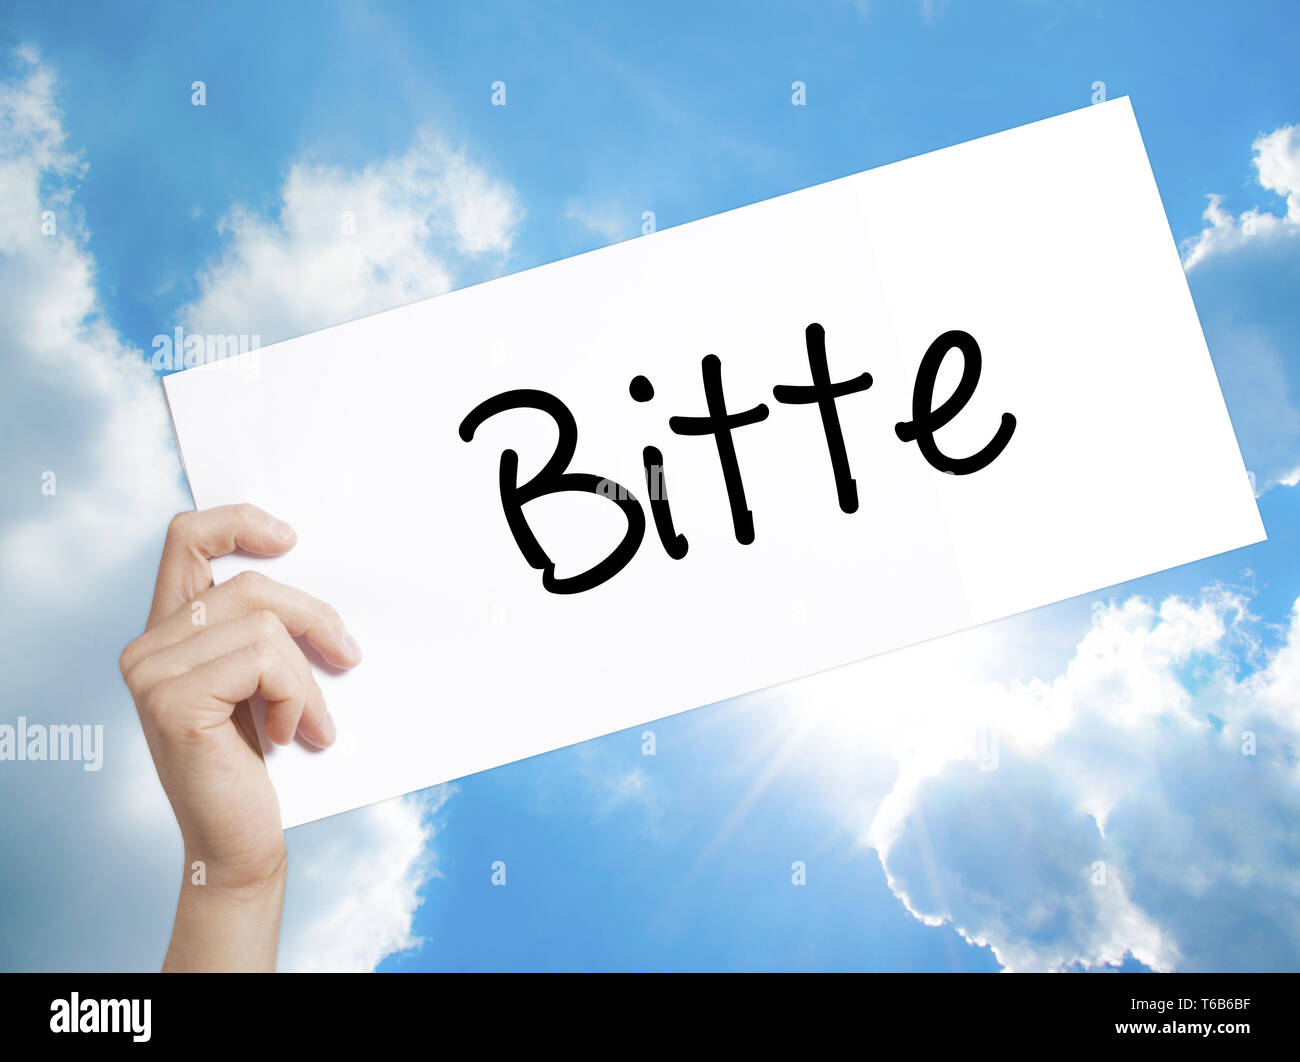 Bitte (Please in German) Sign on white paper. Man Hand Holding Paper with text. Isolated on sky background Stock Photo